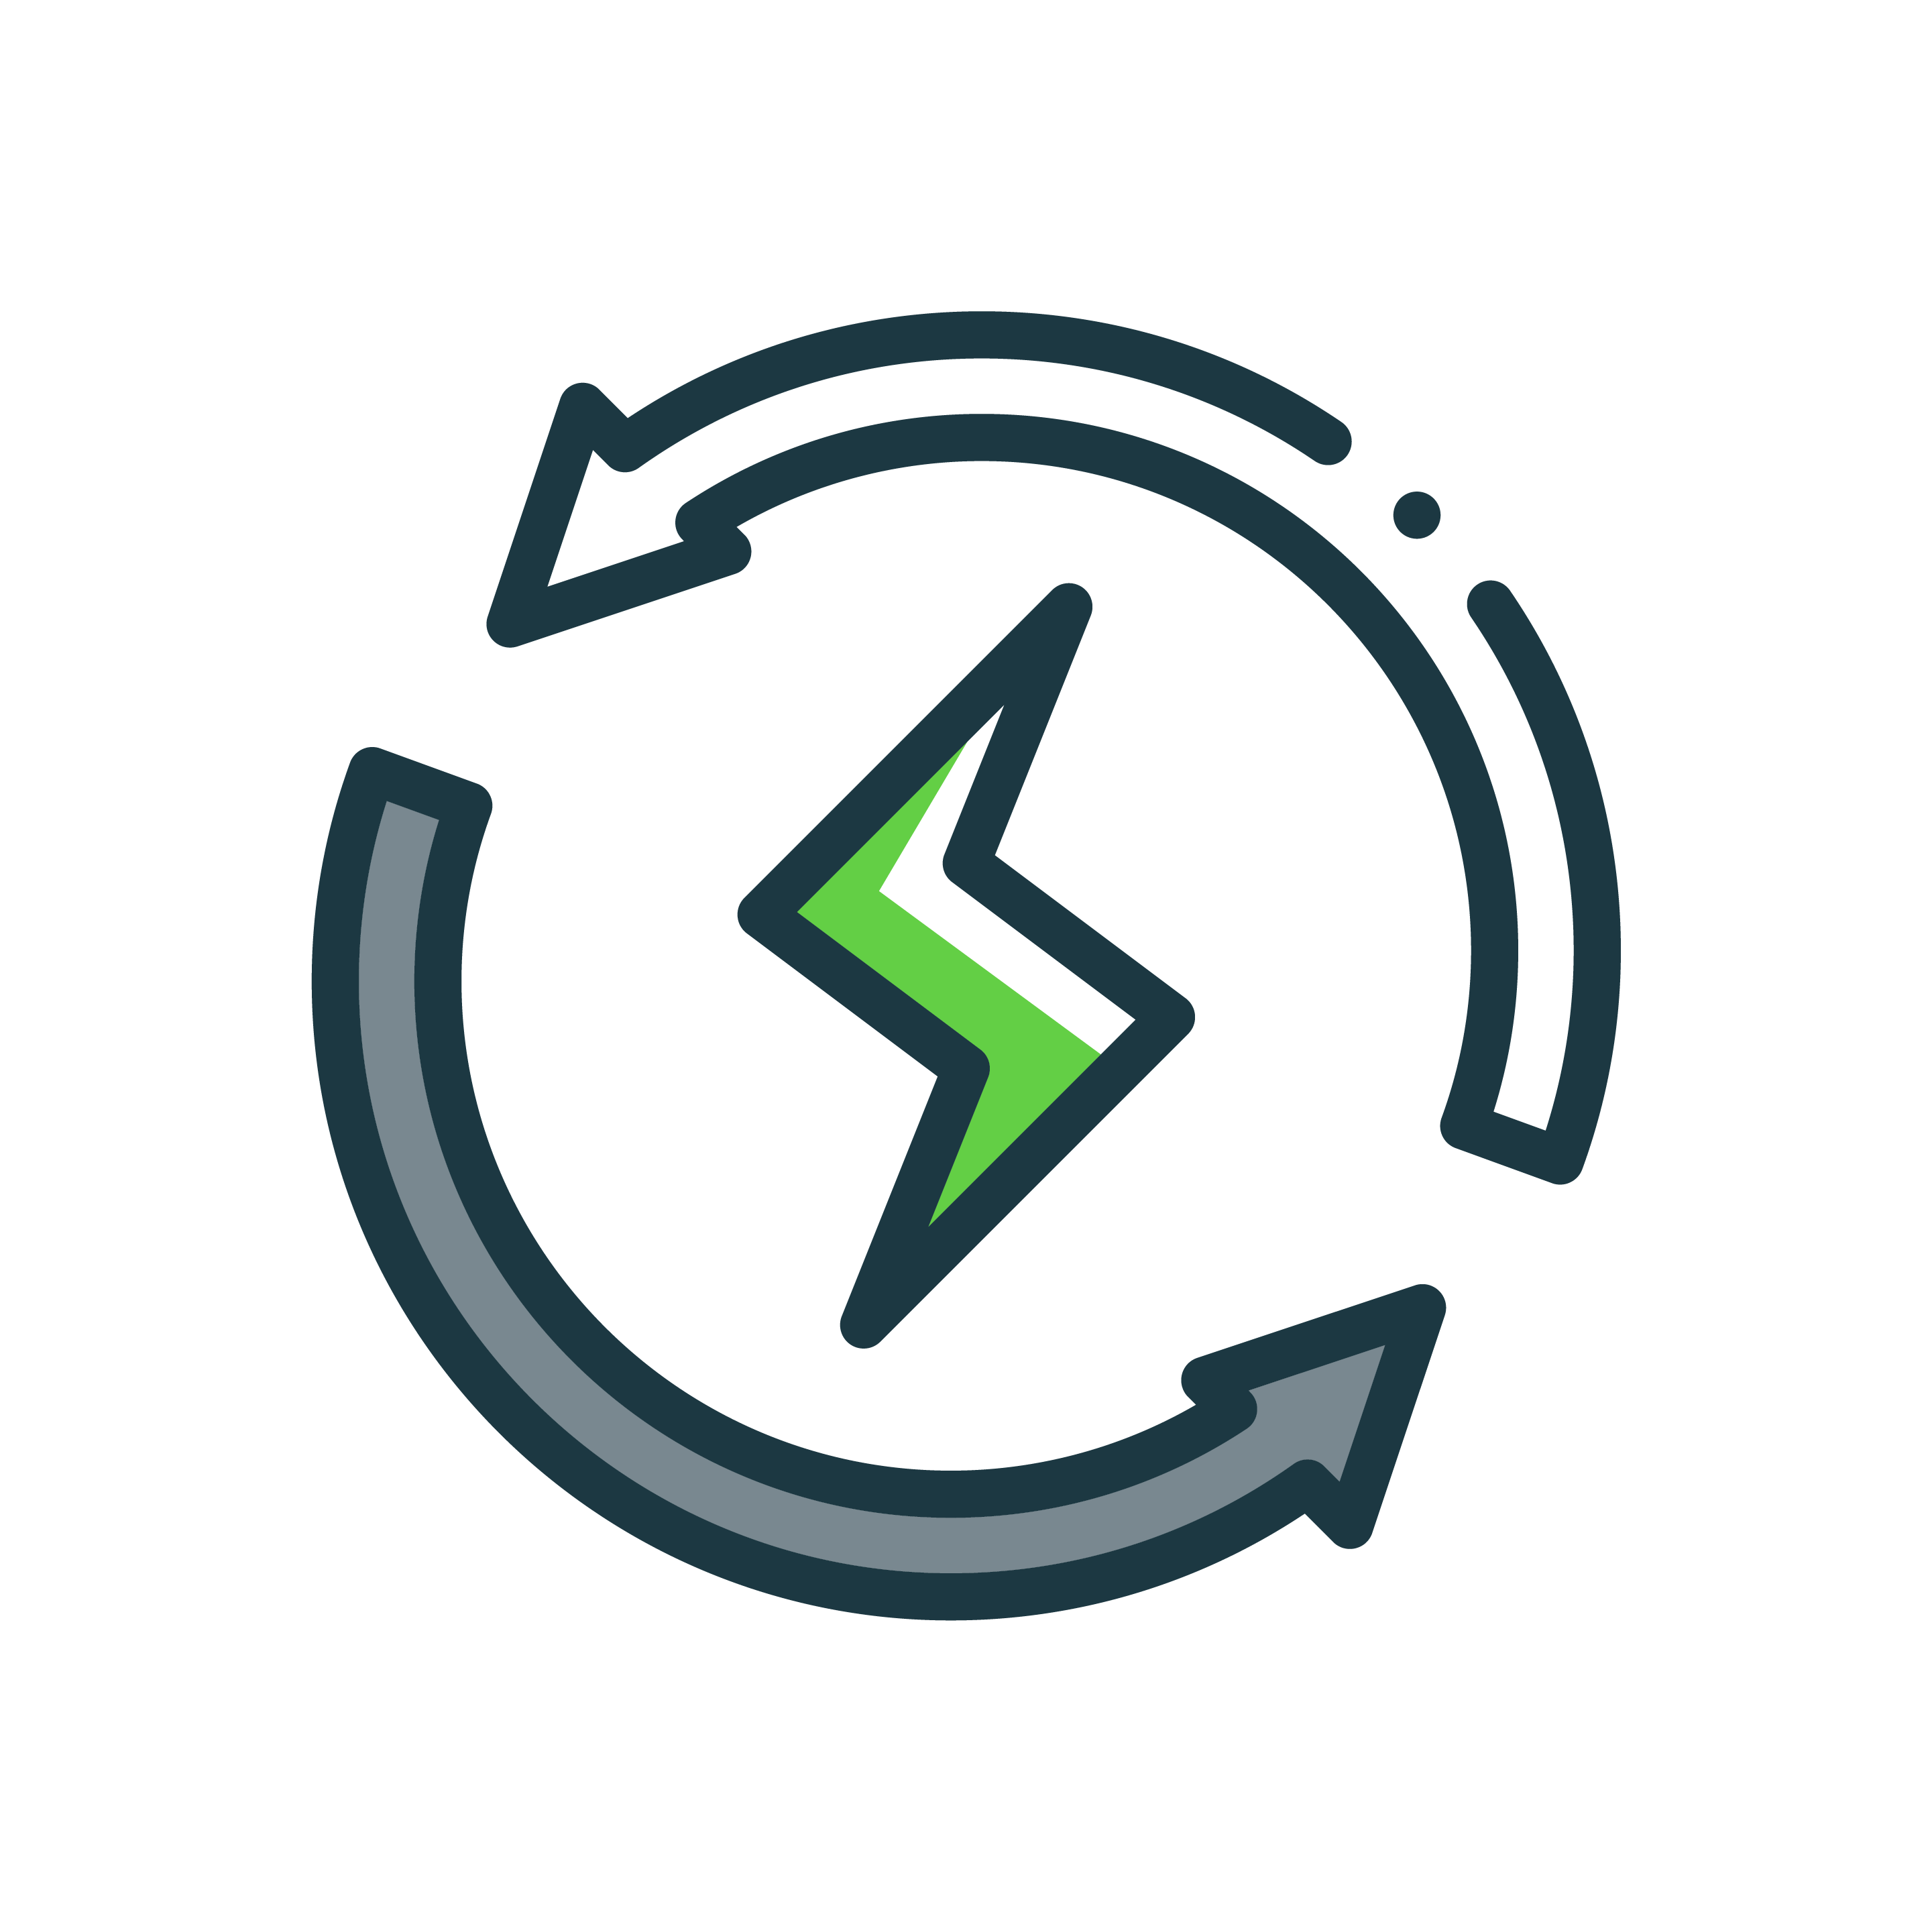 an icon with a greenish lightning symbol that is surrounded by two arrows indicating a circularity